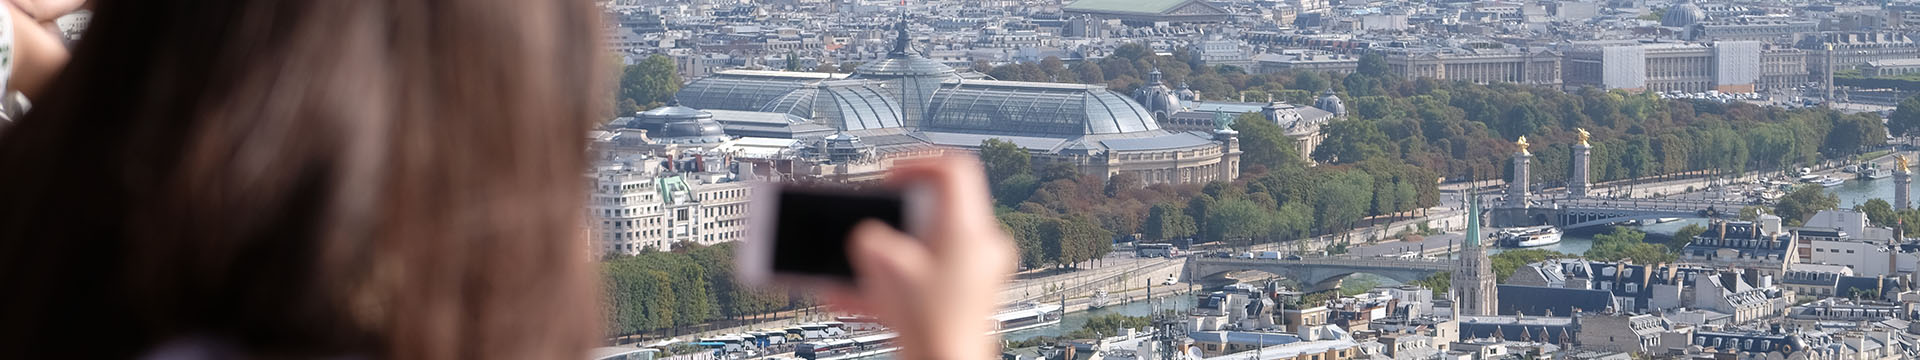 Take a photo from the 2nd floor of the Eiffel Tower